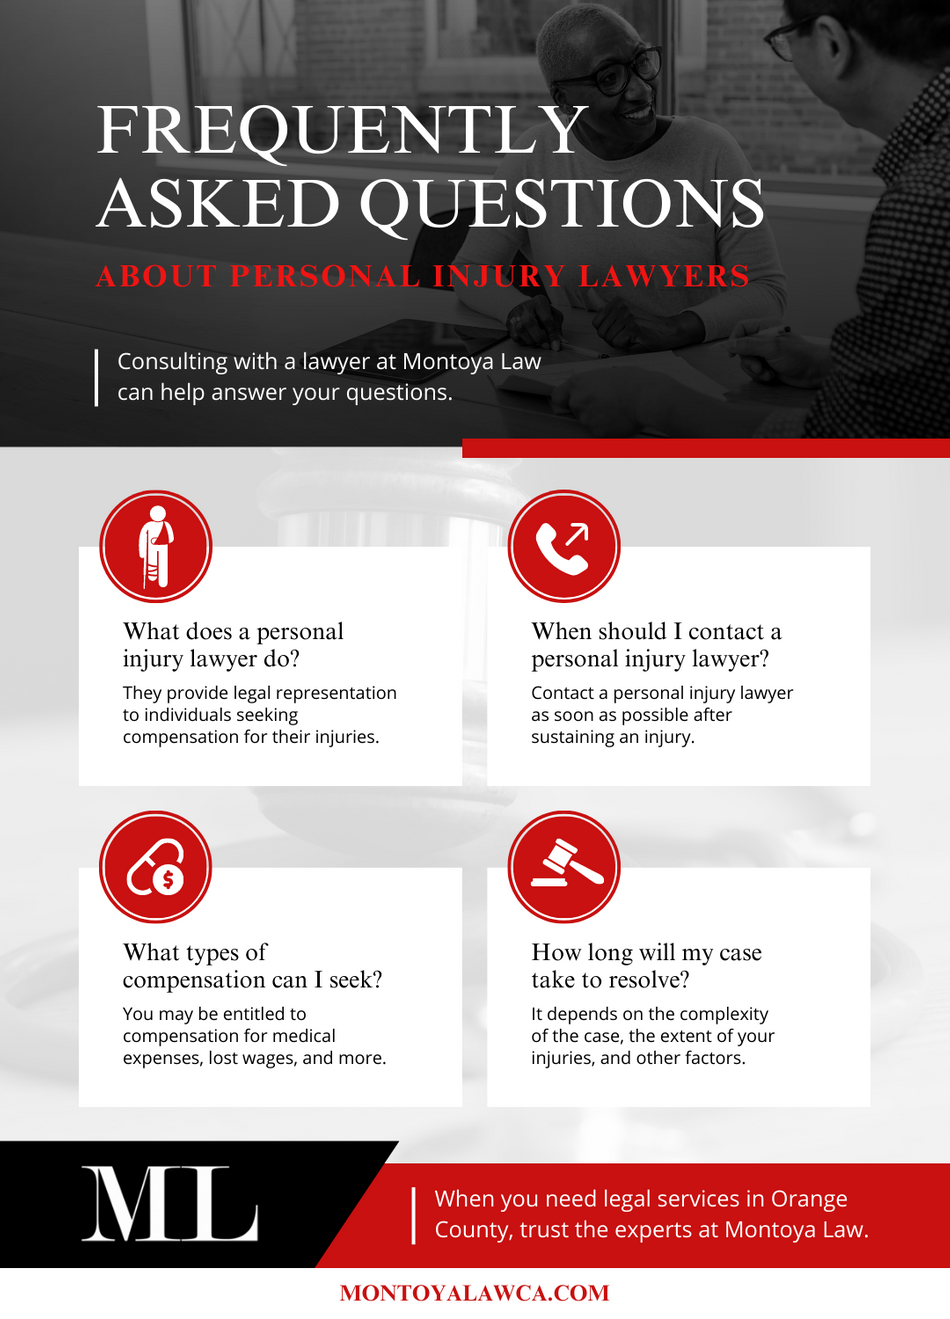 Frequently Asked Questions About Personal Injury Lawyers Infographic